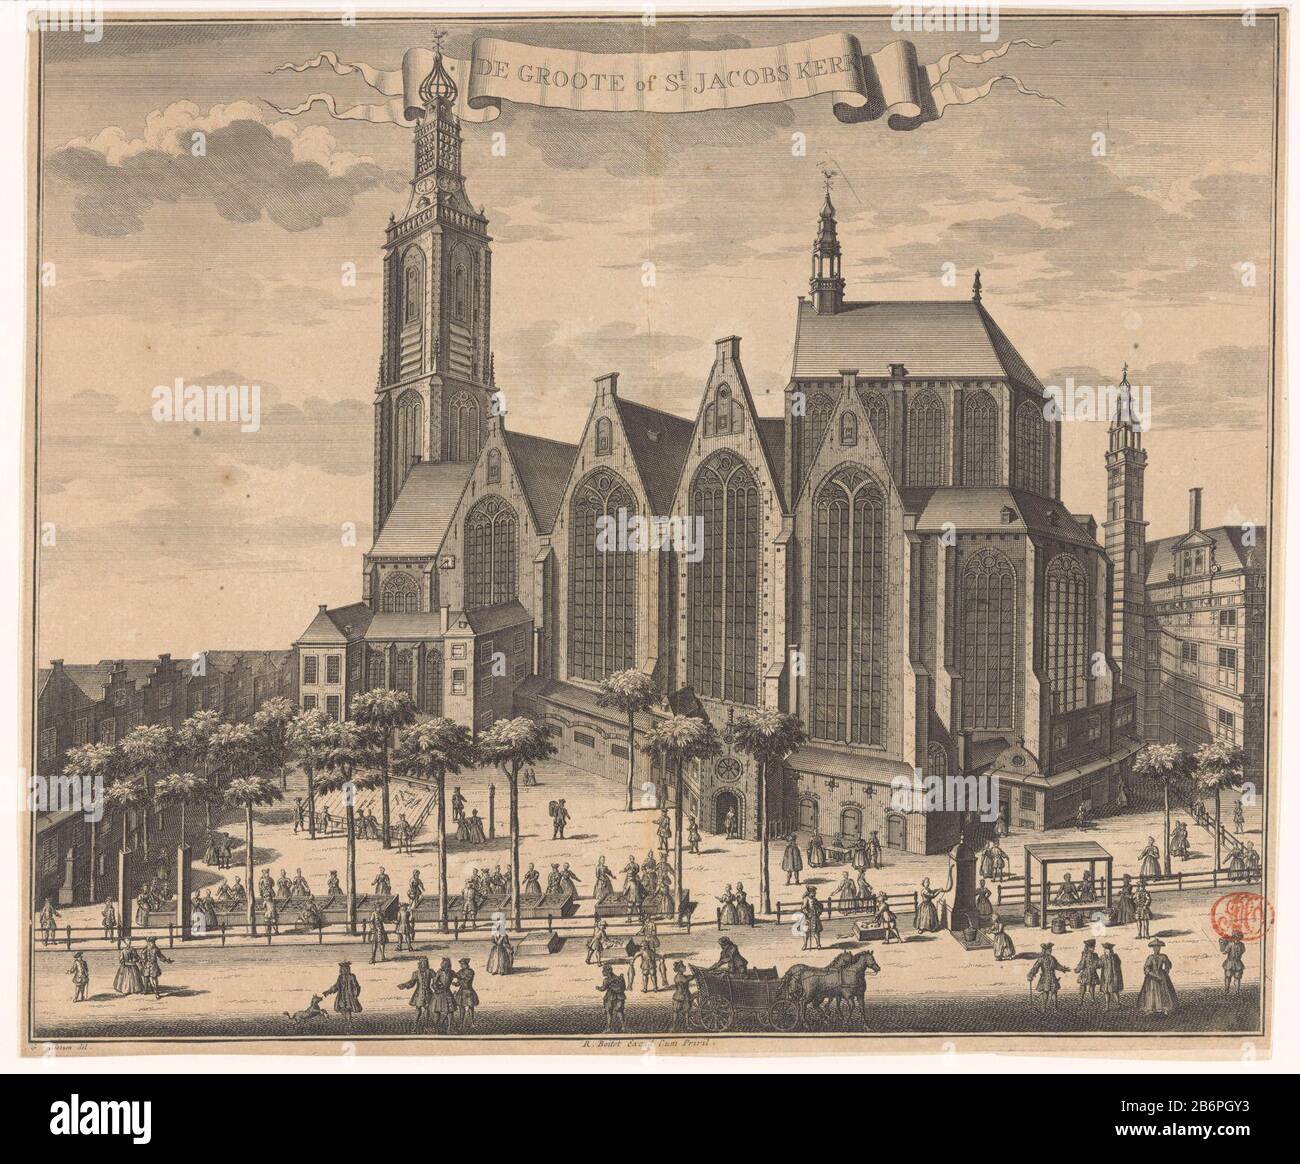 Gezicht op de Grote Kerk te Den Haag De Groote of St Jacobs kerk (titel op object) View of the Great Church, also known as St. James, in the Hague. Seen from the side of the Riviervismarkt. Church several stalls and figuren. Manufacturer : printmaker: anonymous to drawing: Gerrit van Giessen (listed building) publisher: Reinier Boitet (listed building) publisher: Adrianus Douci Pietersz Provider of privilege unknown (listed property) Place manufacture: to order of: The Hague Publisher: Delft Publisher: Amsterdam Date: 1730 - 1736 Material: paper Technique: etching / engra (printing process) Me Stock Photo